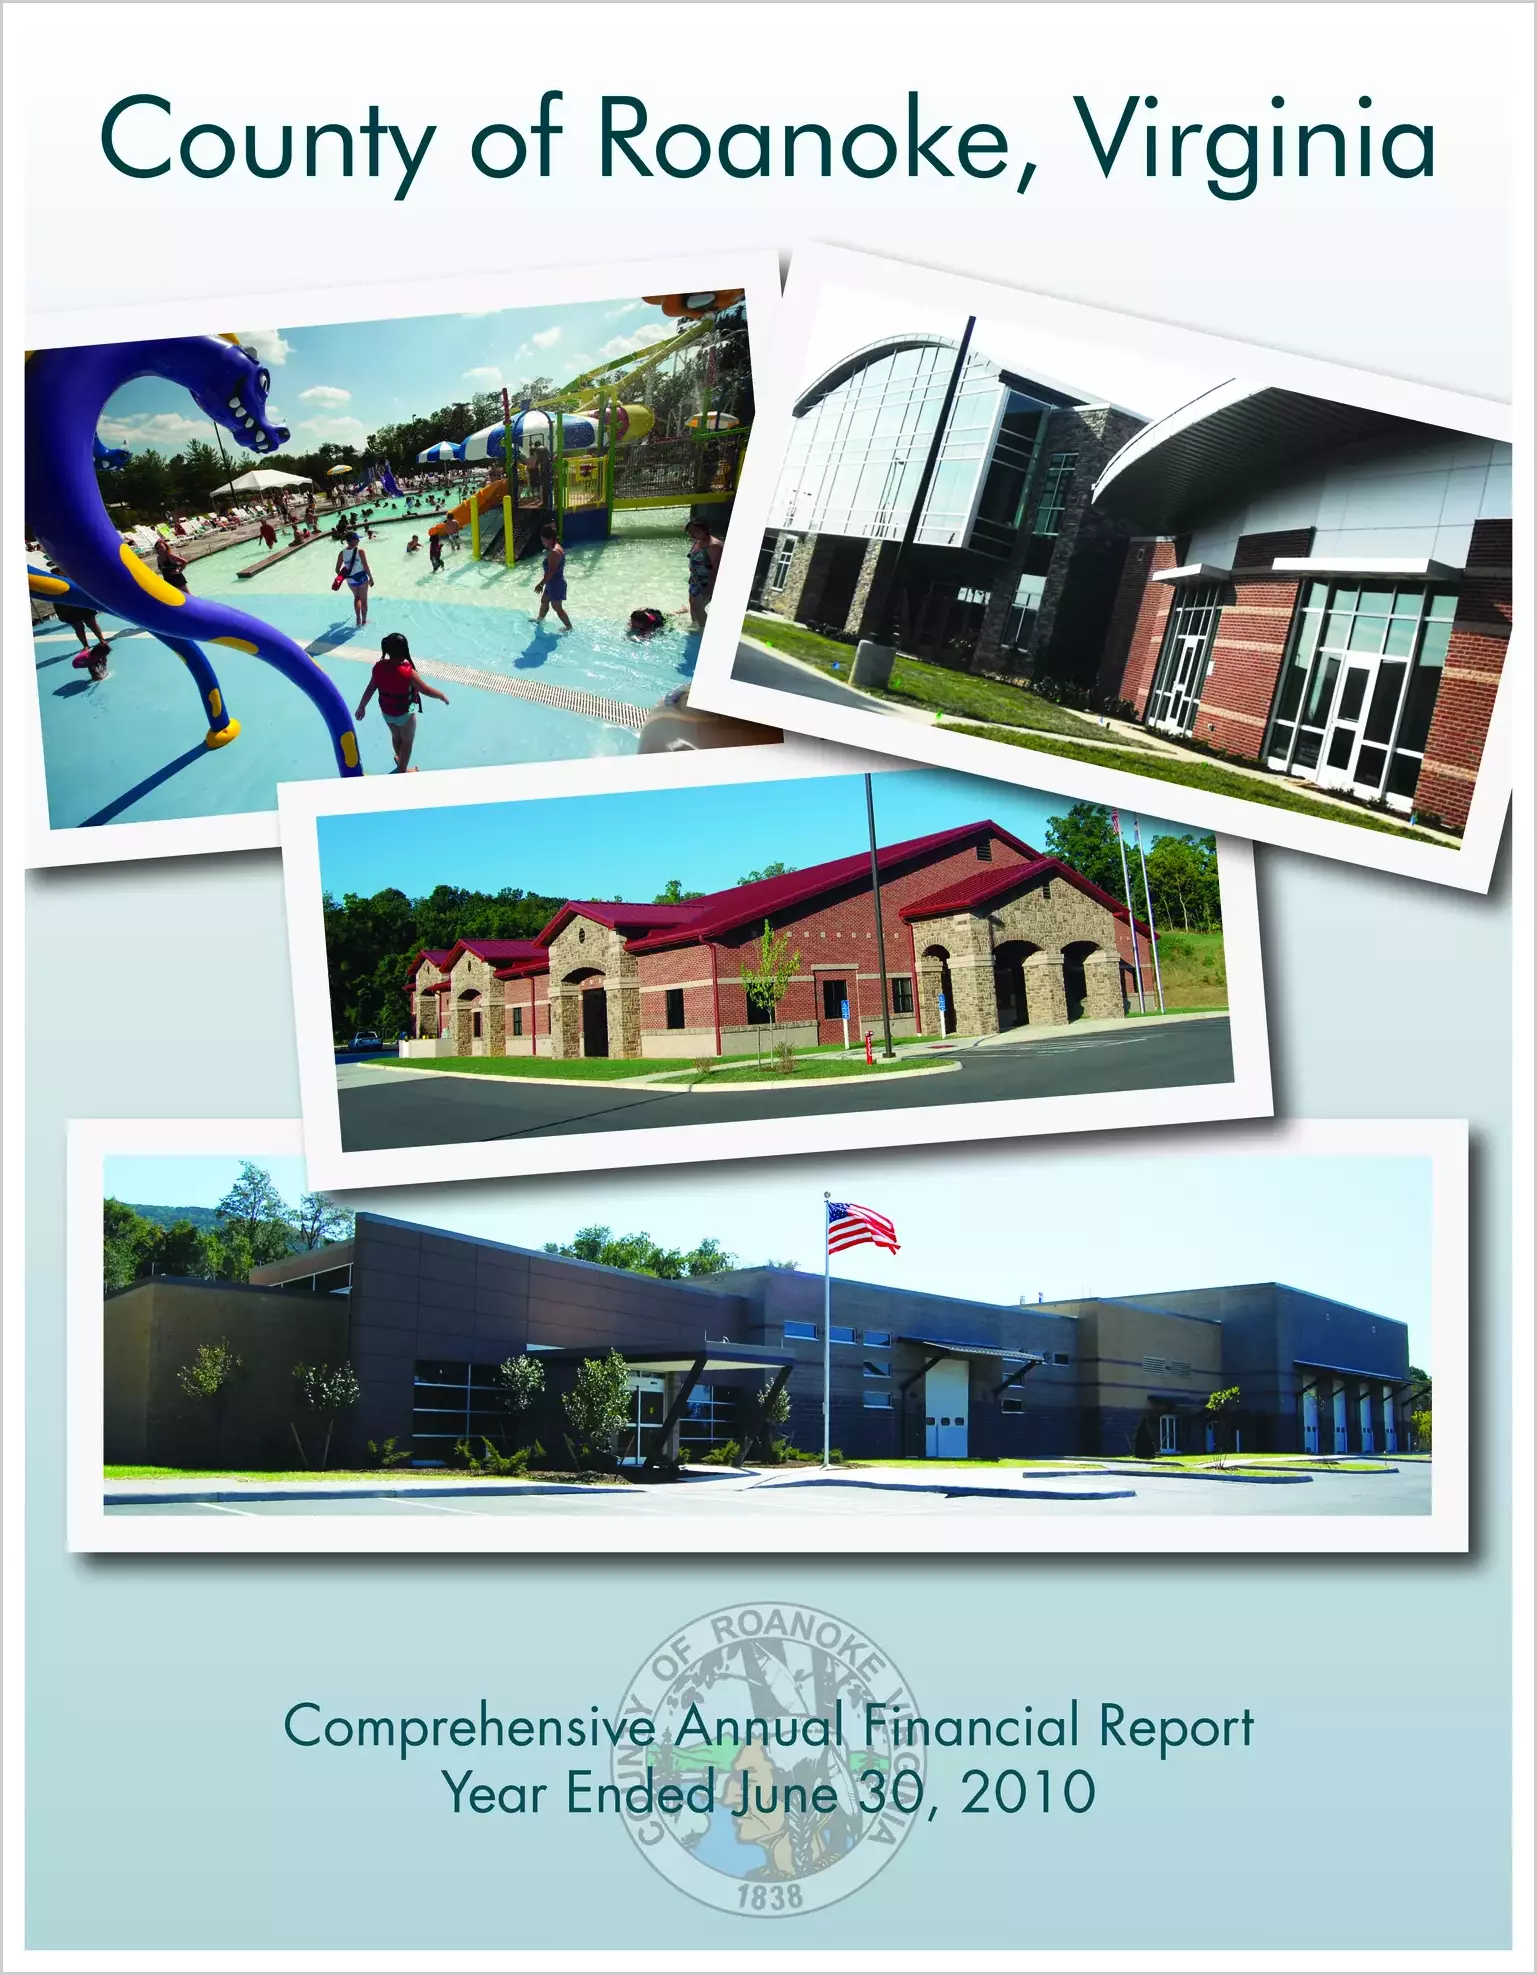 2010 Annual Financial Report for County of Roanoke